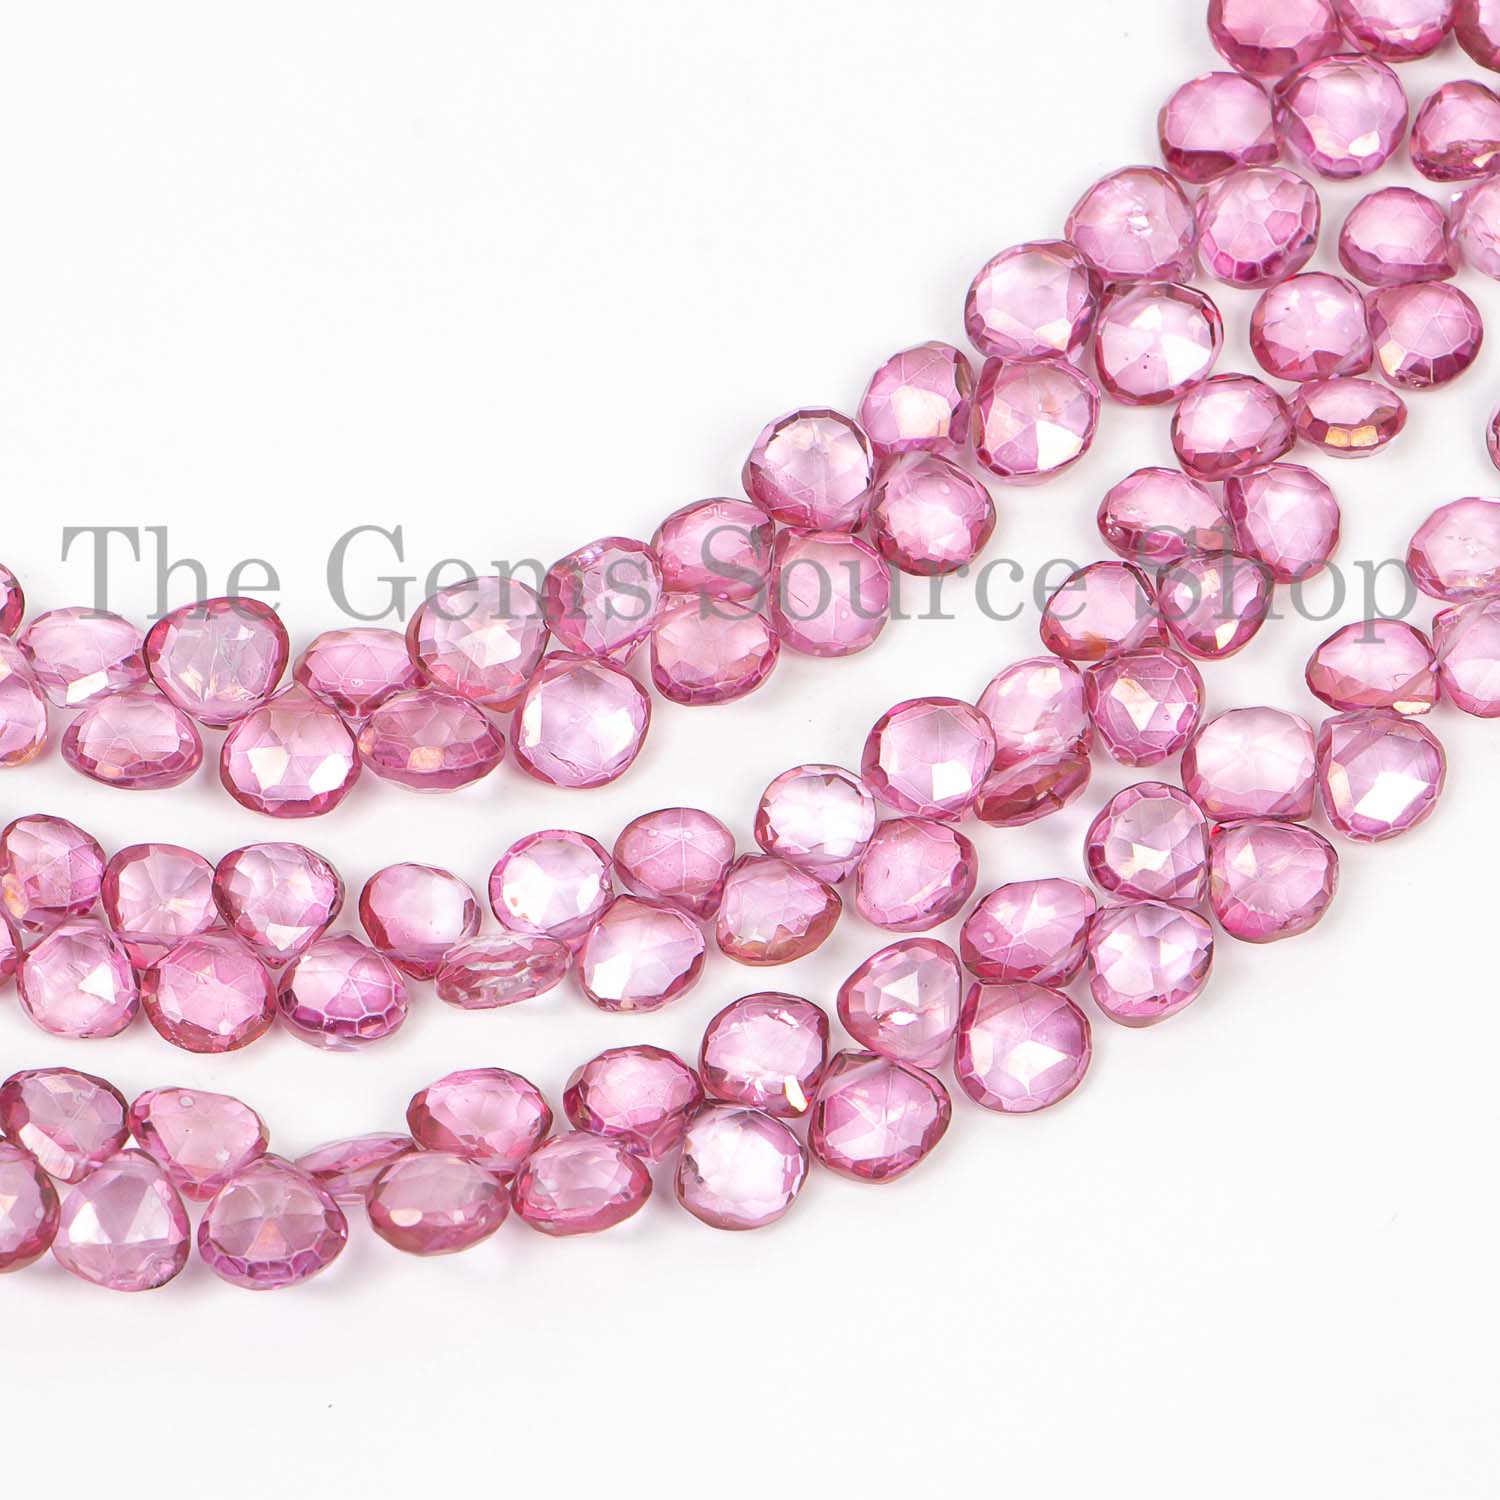 Pink Mystic Topaz Faceted Heart Briolette, Gemstone Beads, Craft Loose Beads